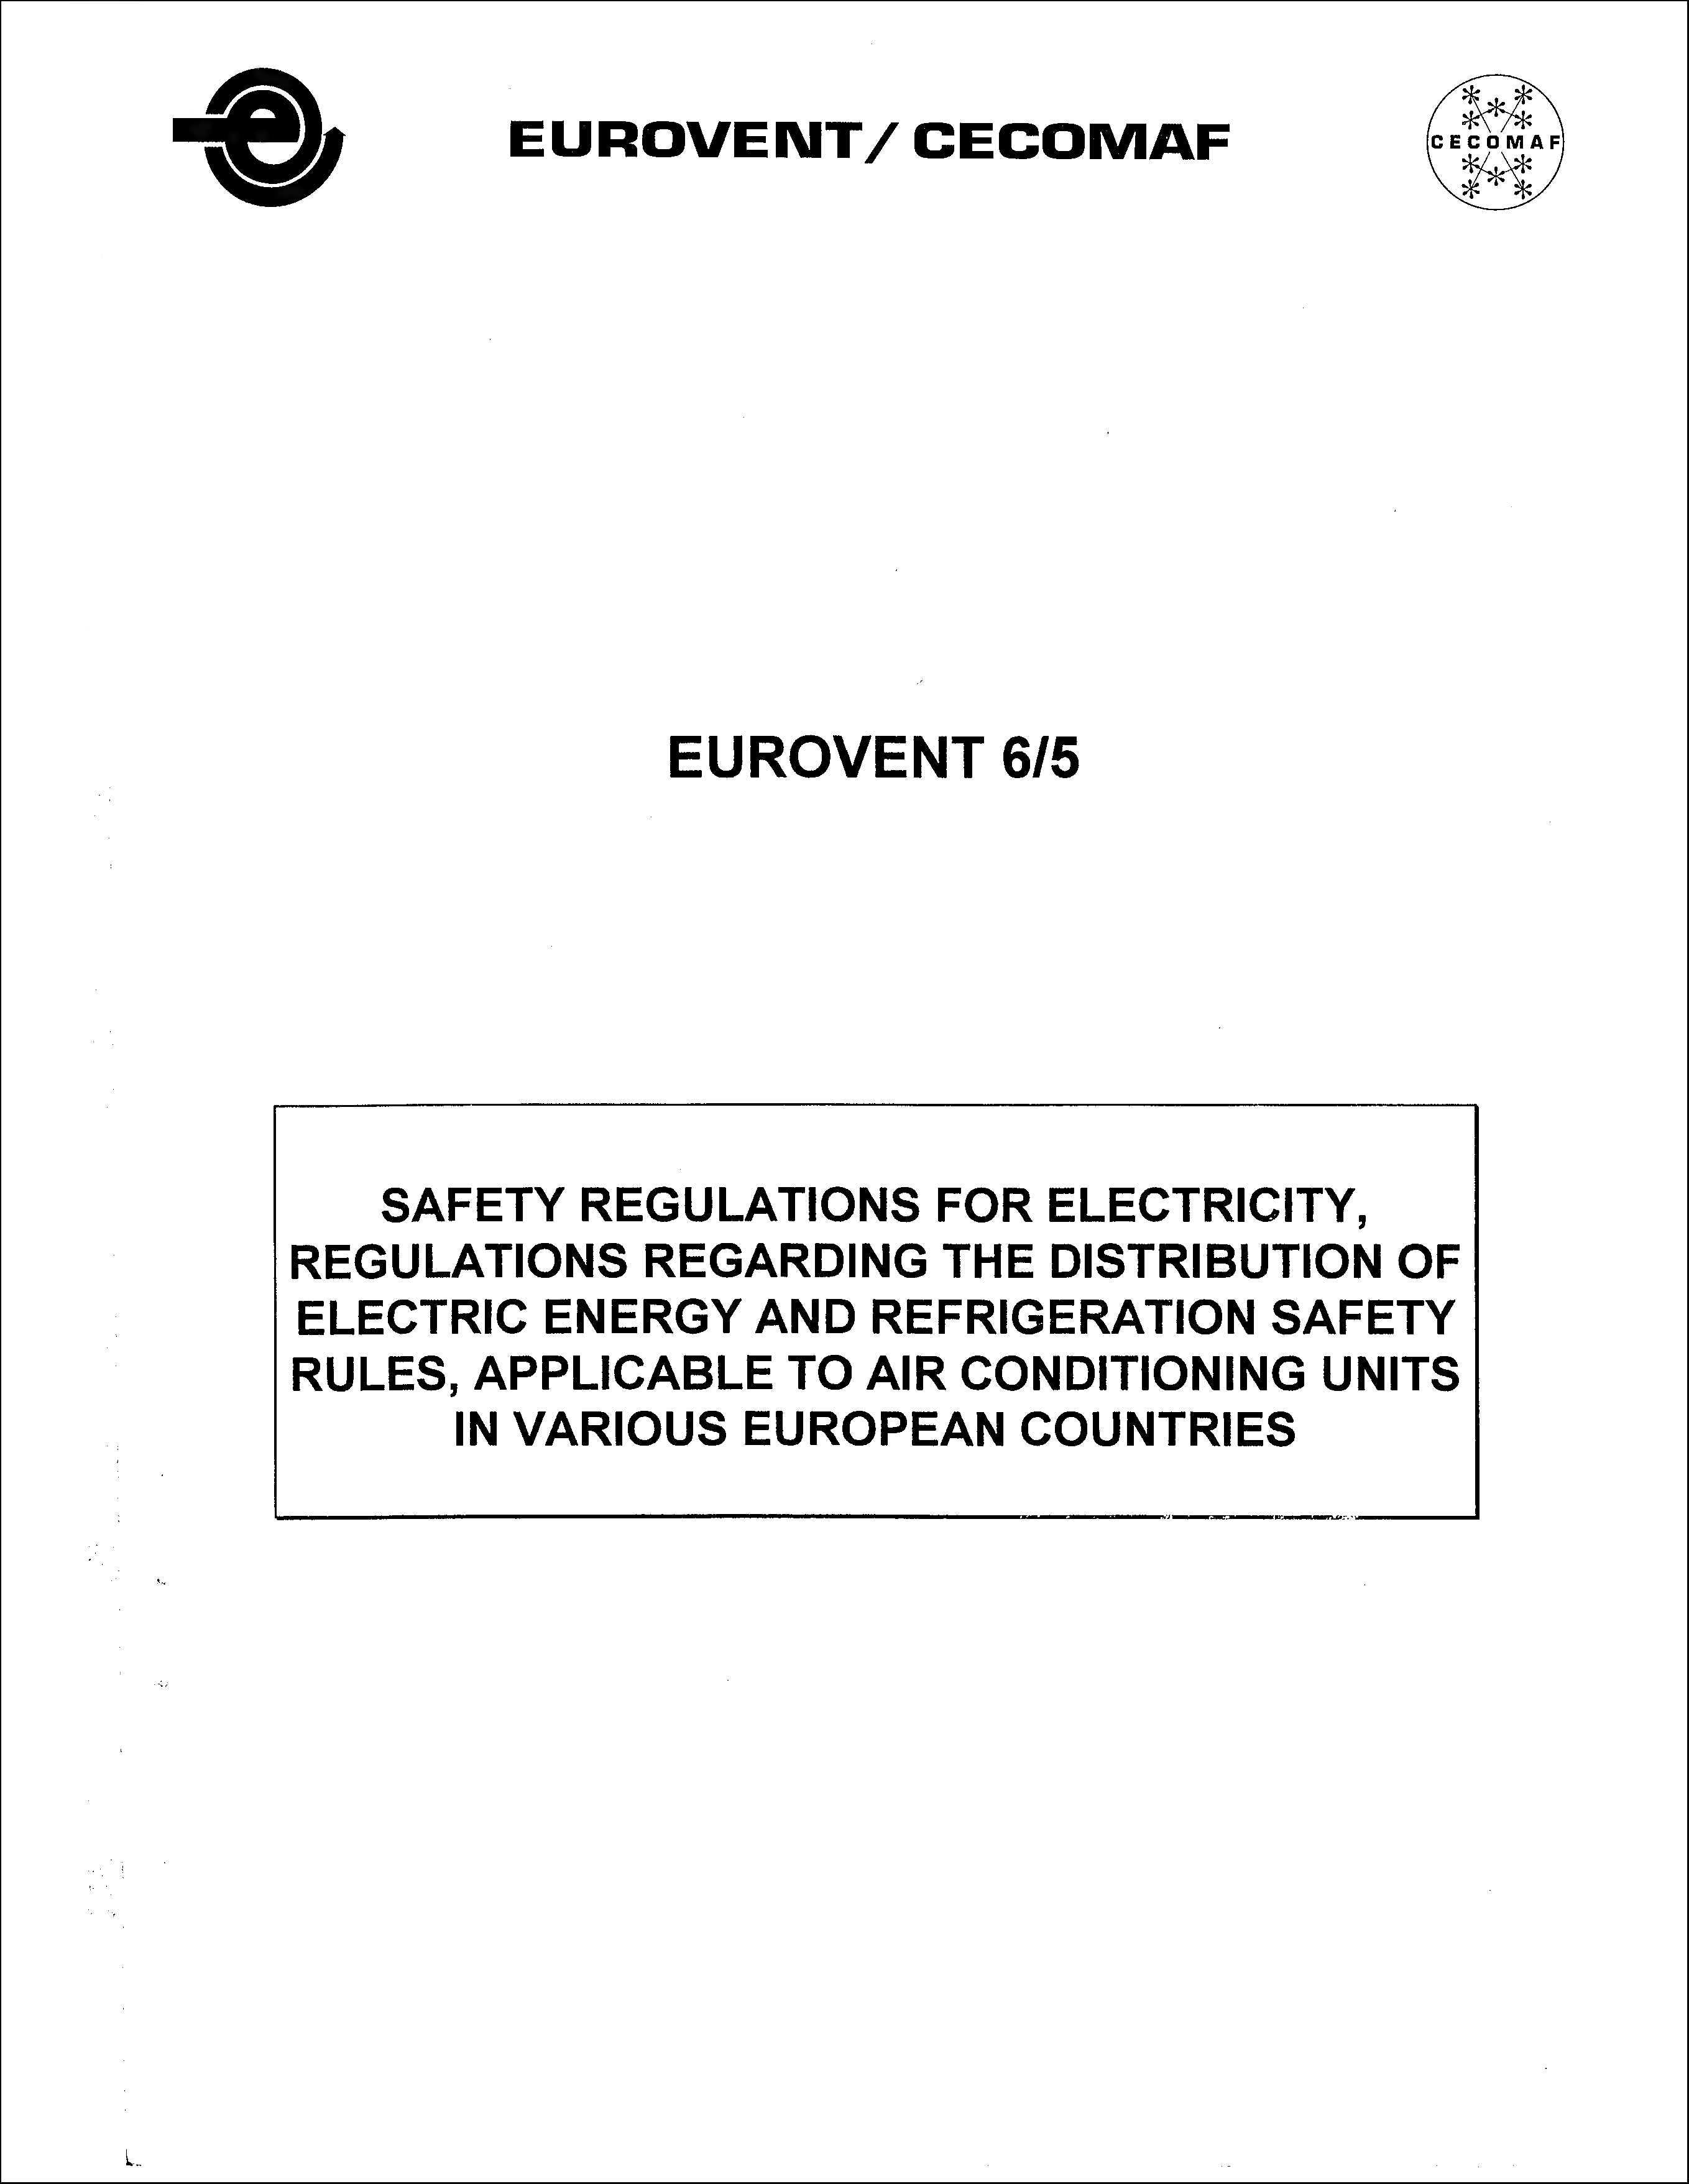 1985 - Eurovent safety regulations for electricity